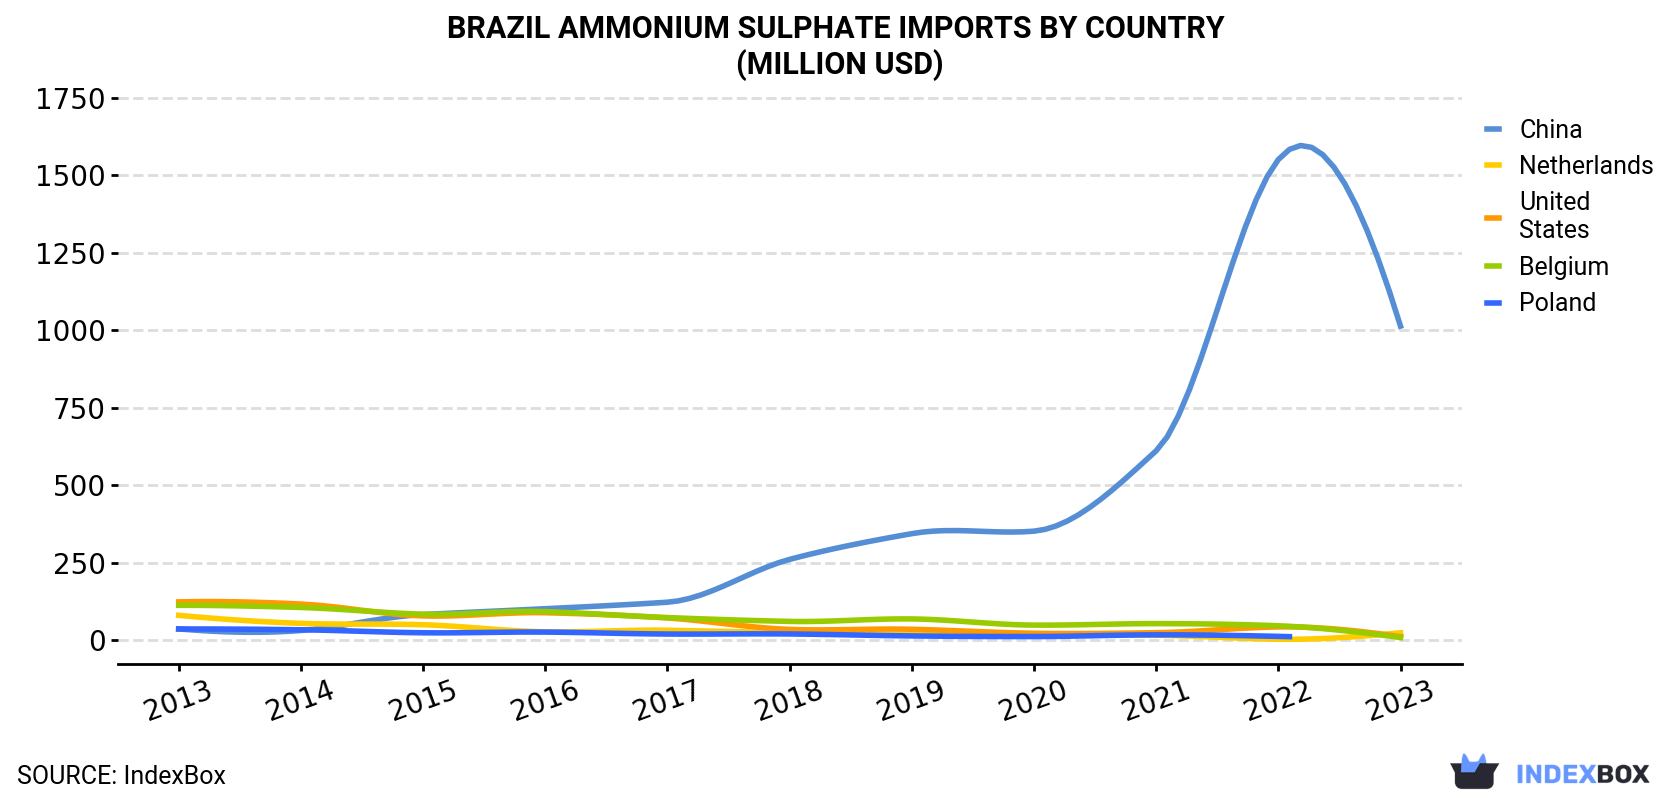 Brazil Ammonium Sulphate Imports By Country (Million USD)